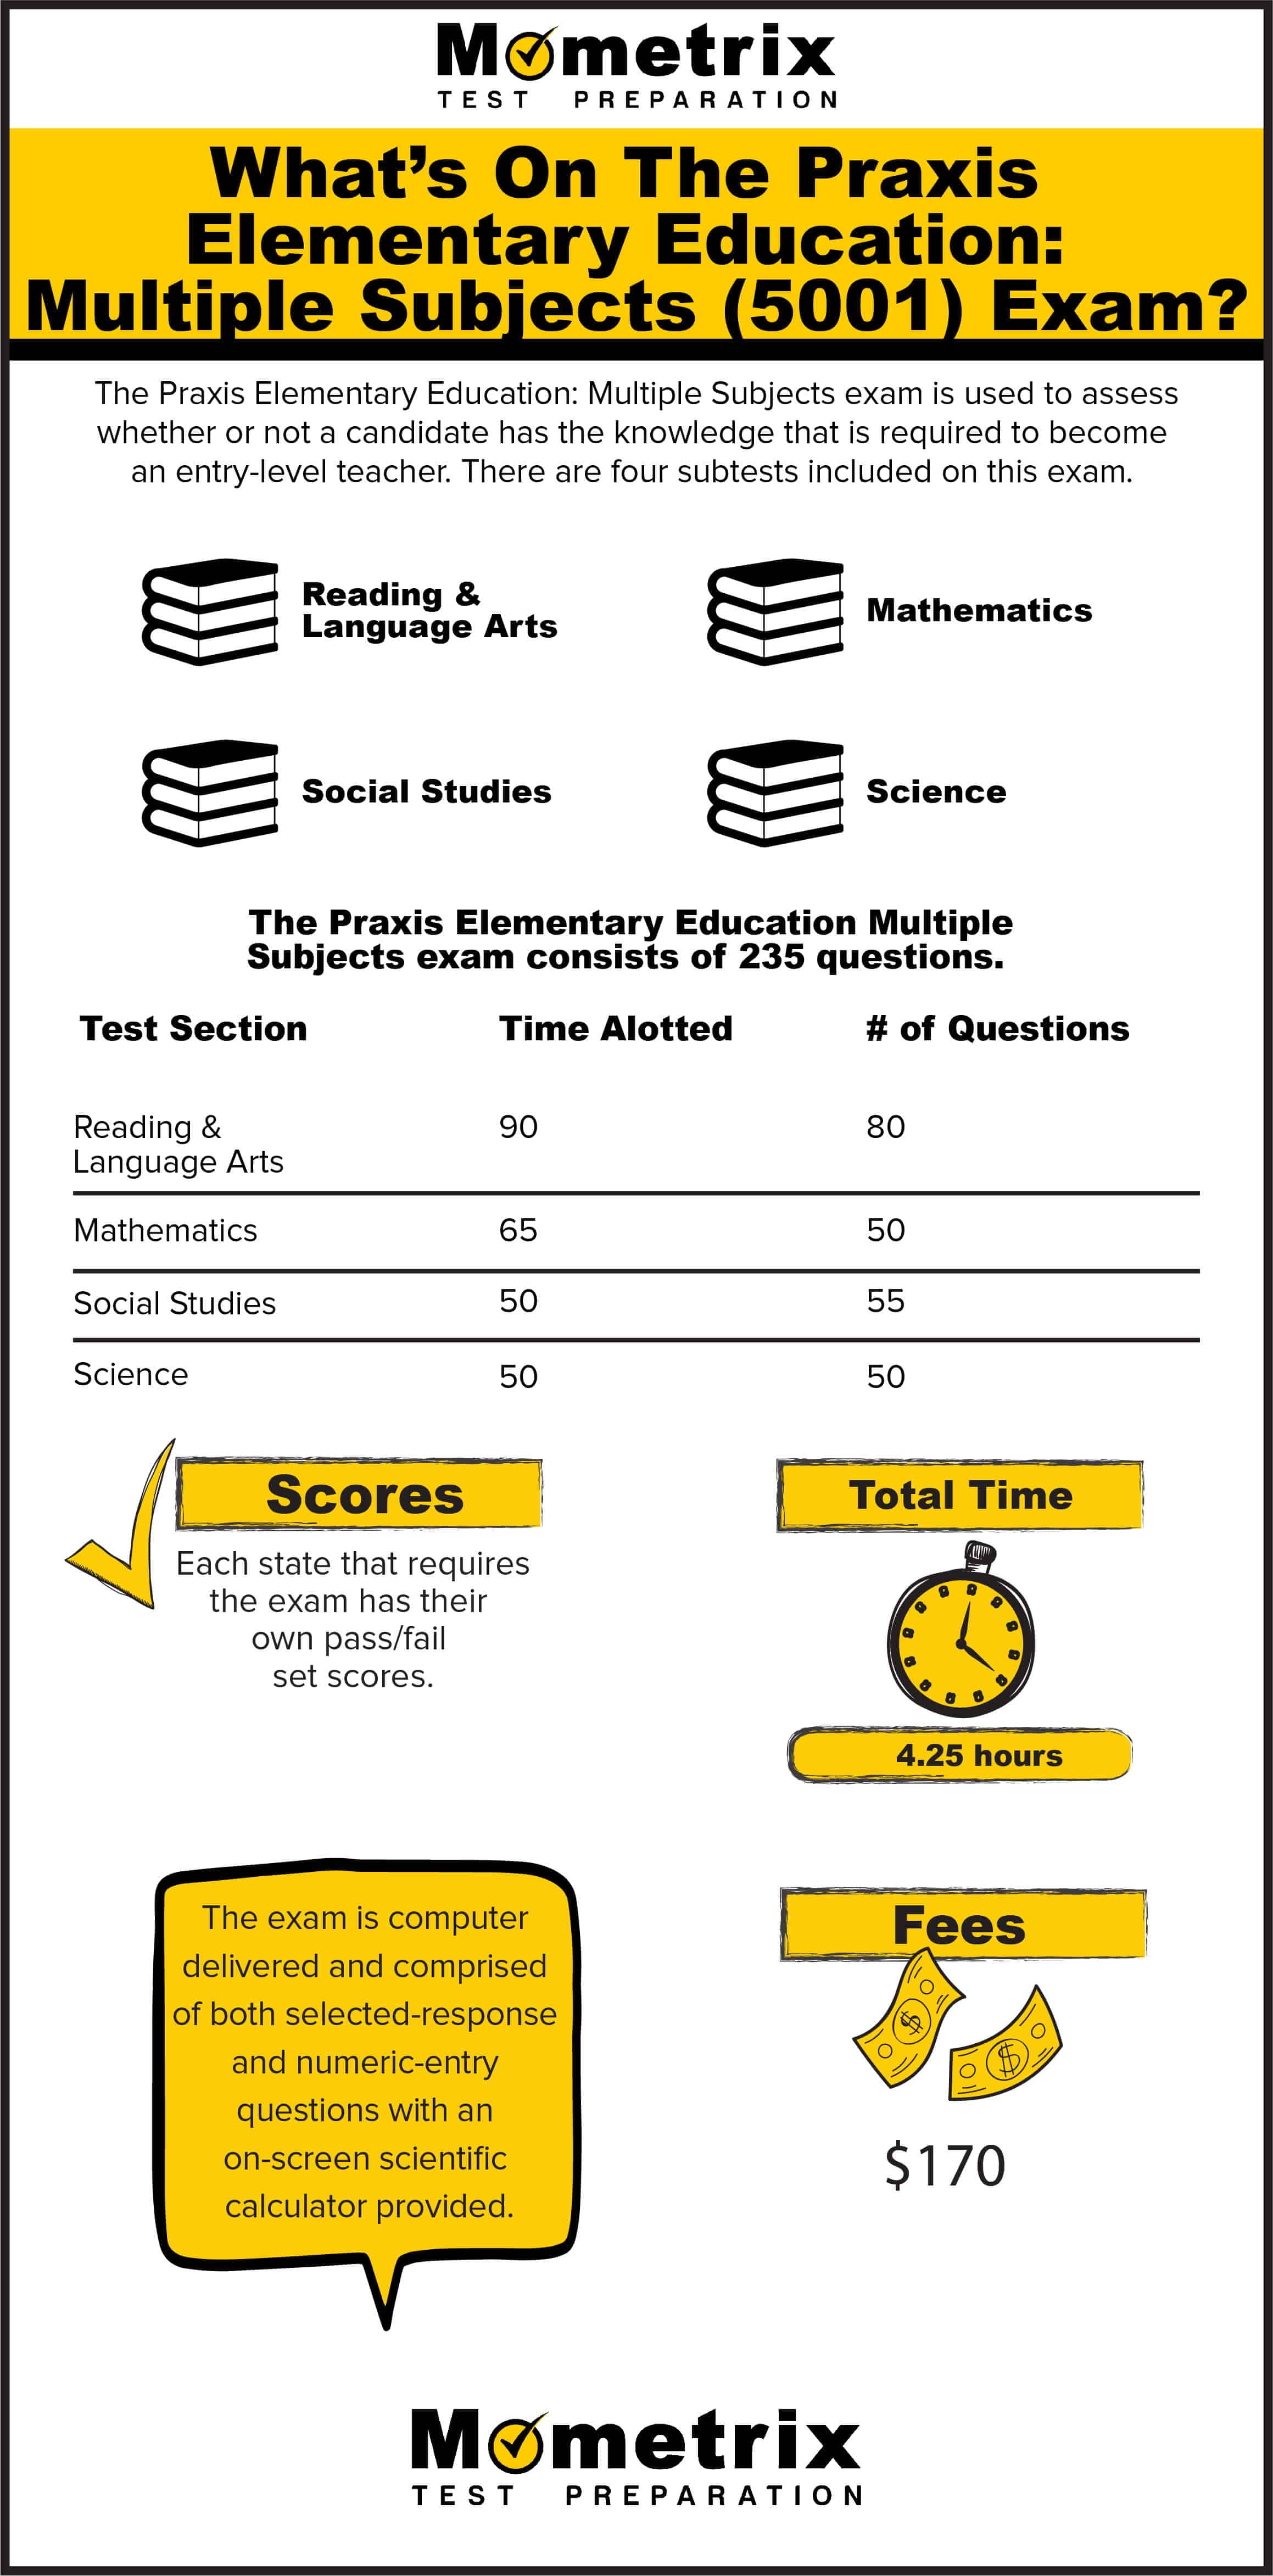 What's on the Praxis Elementary Education Multiple Subjects (5001) Exam